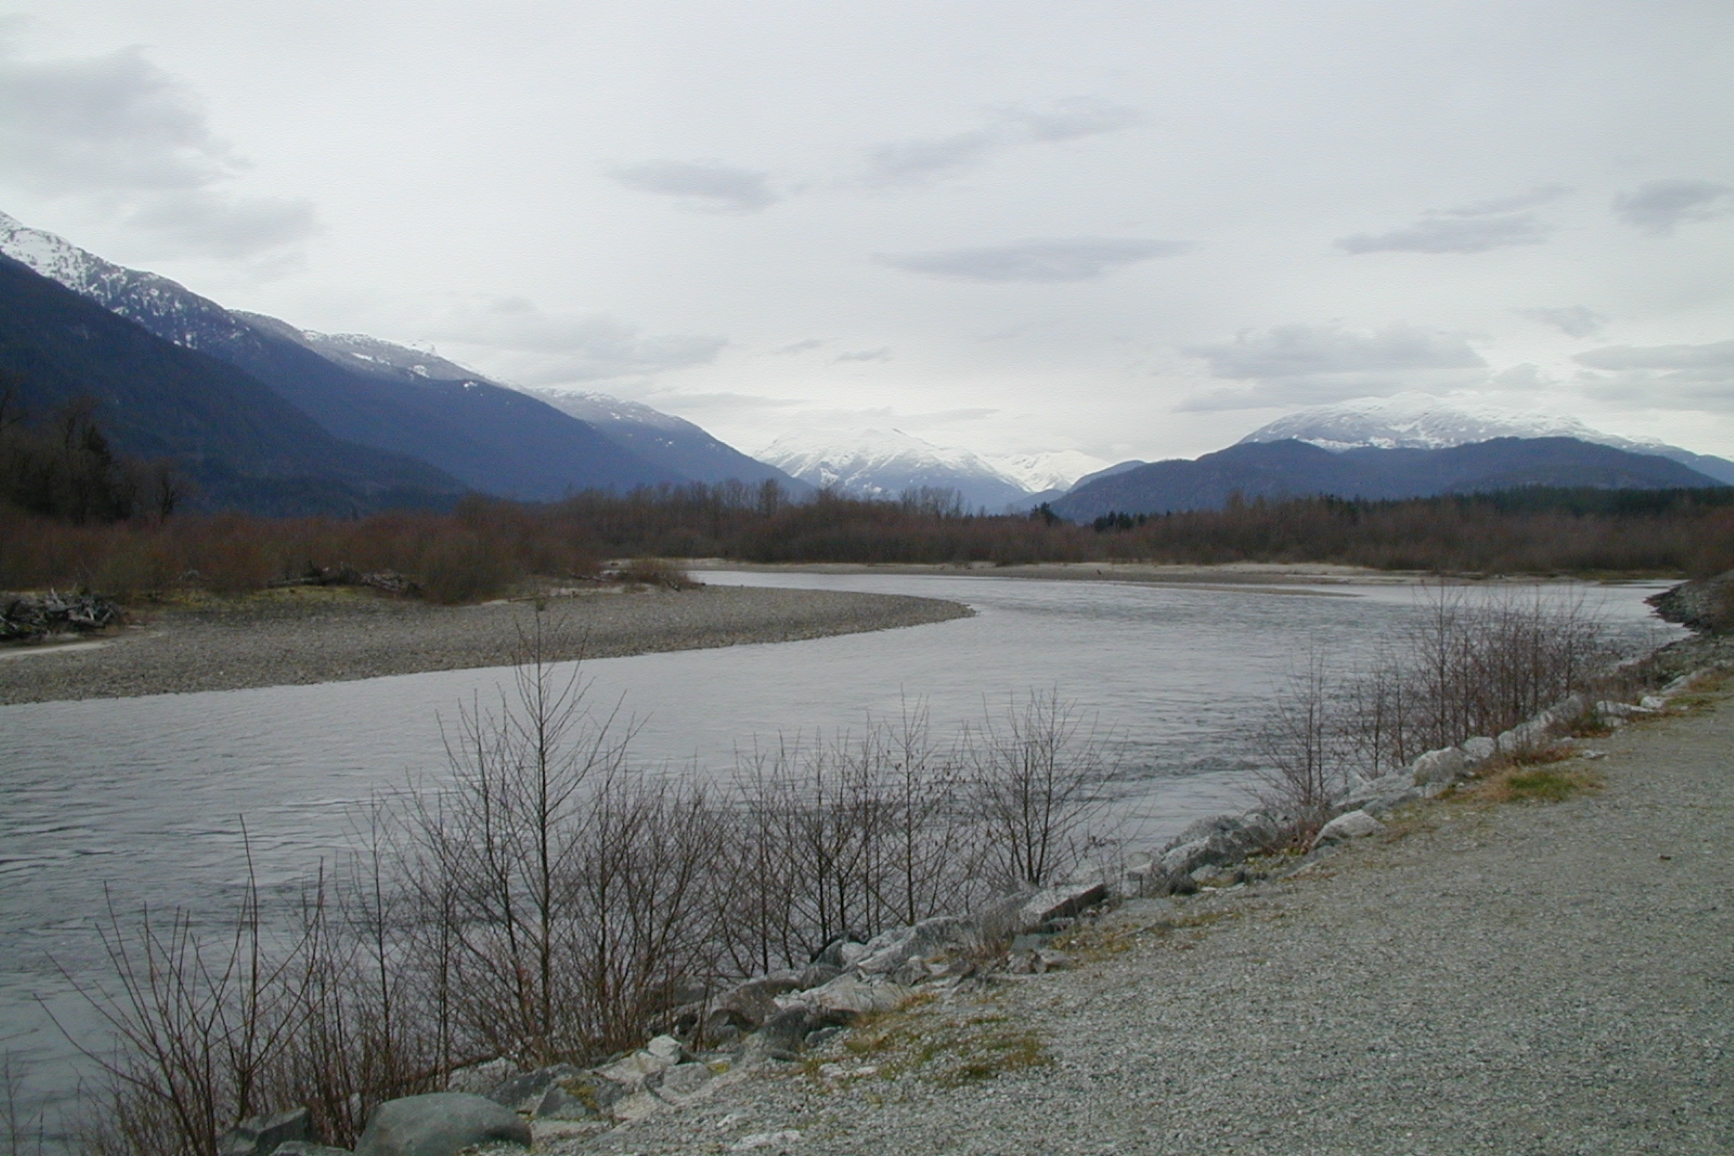 Looking north up the Squamish River